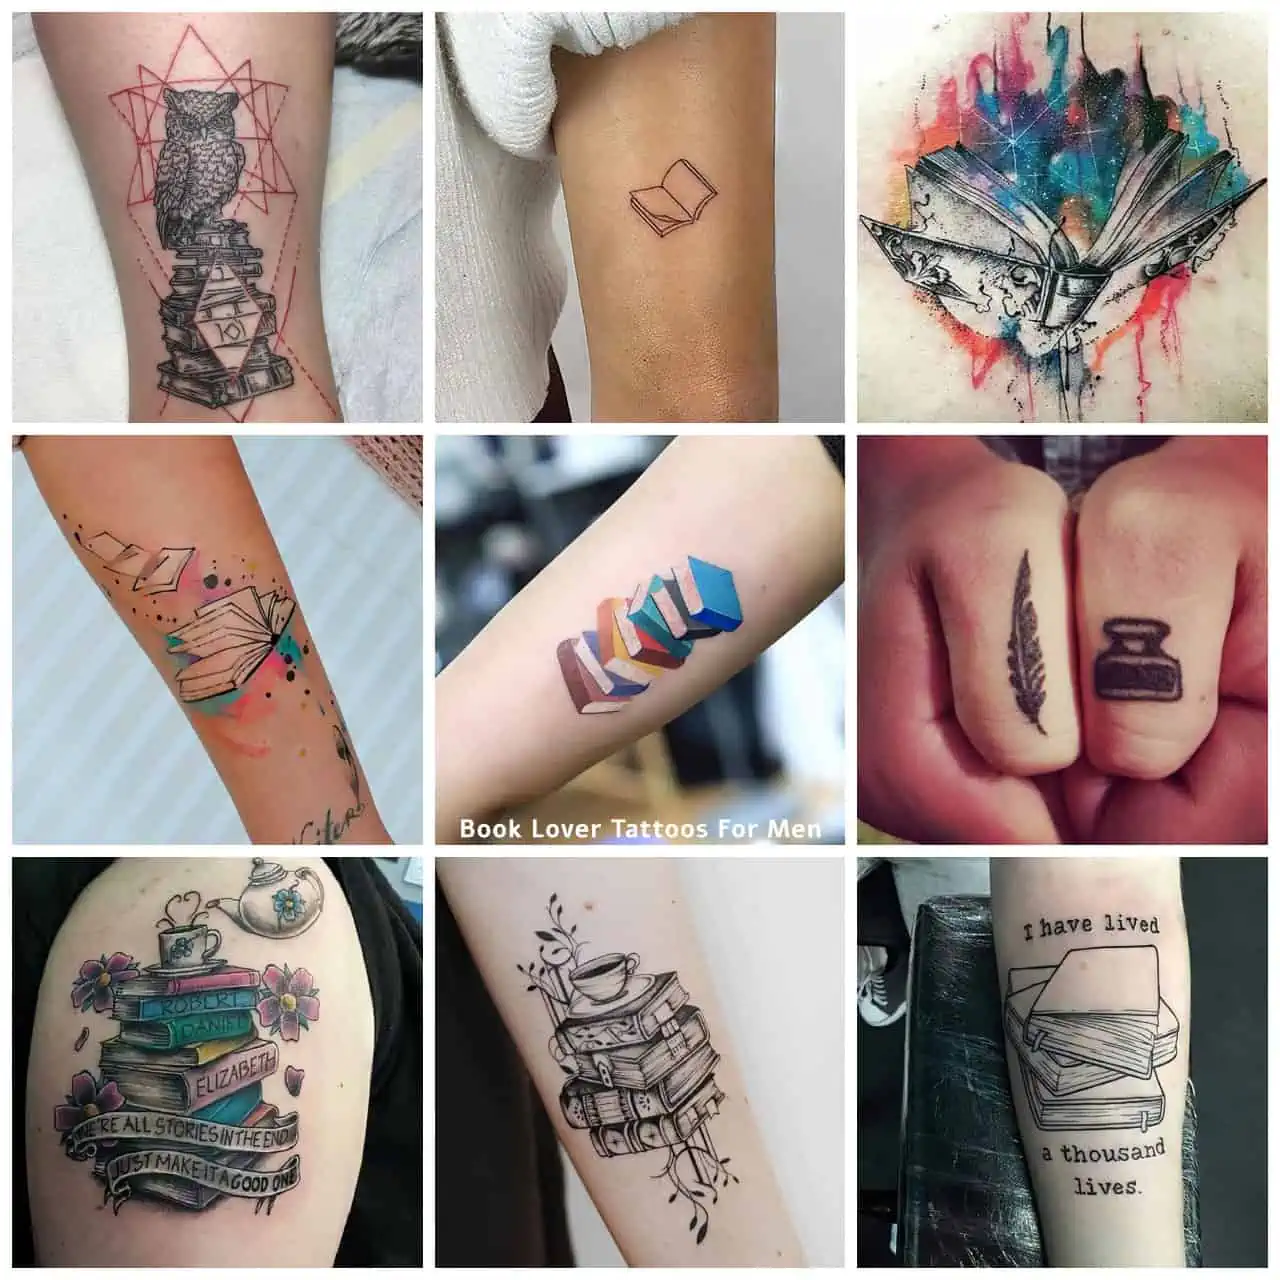 104 Creative Tattoo Ideas to Express Your Style